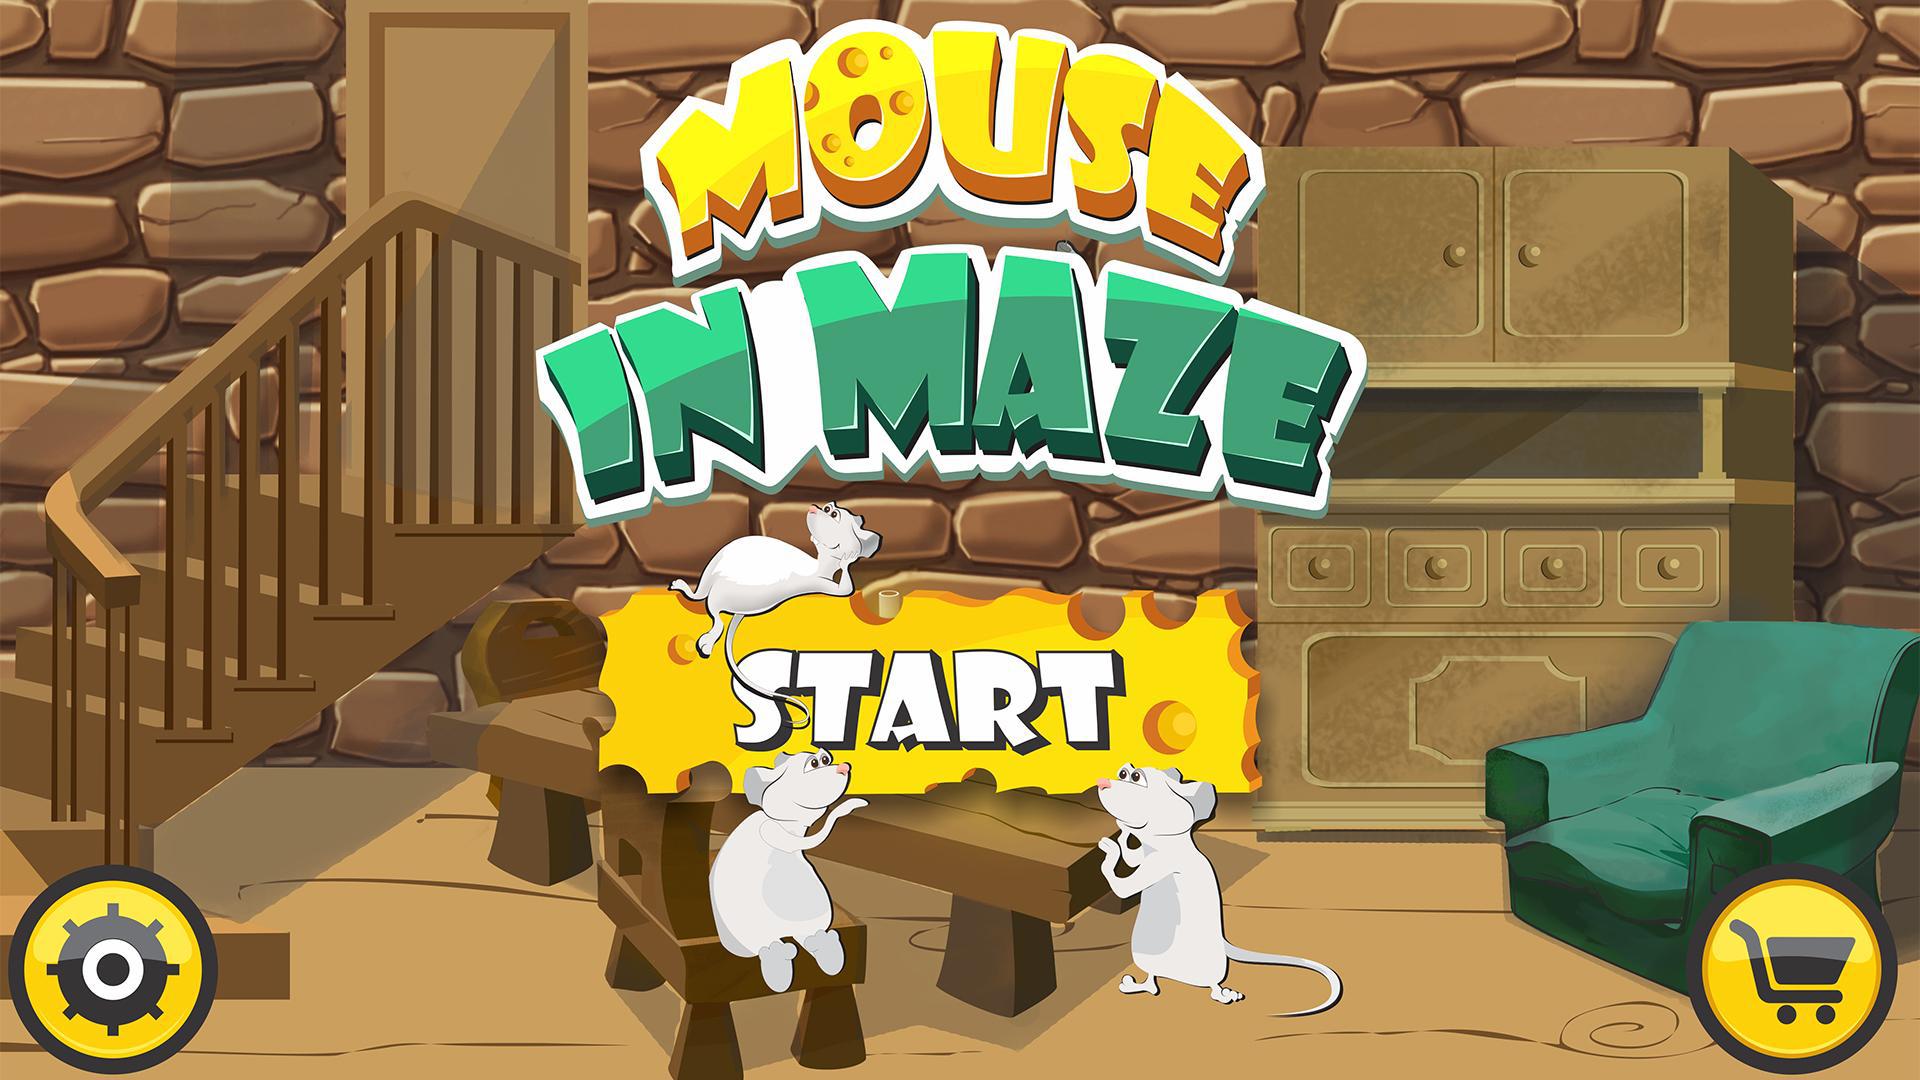 Mouse In Maze_游戏简介_图2